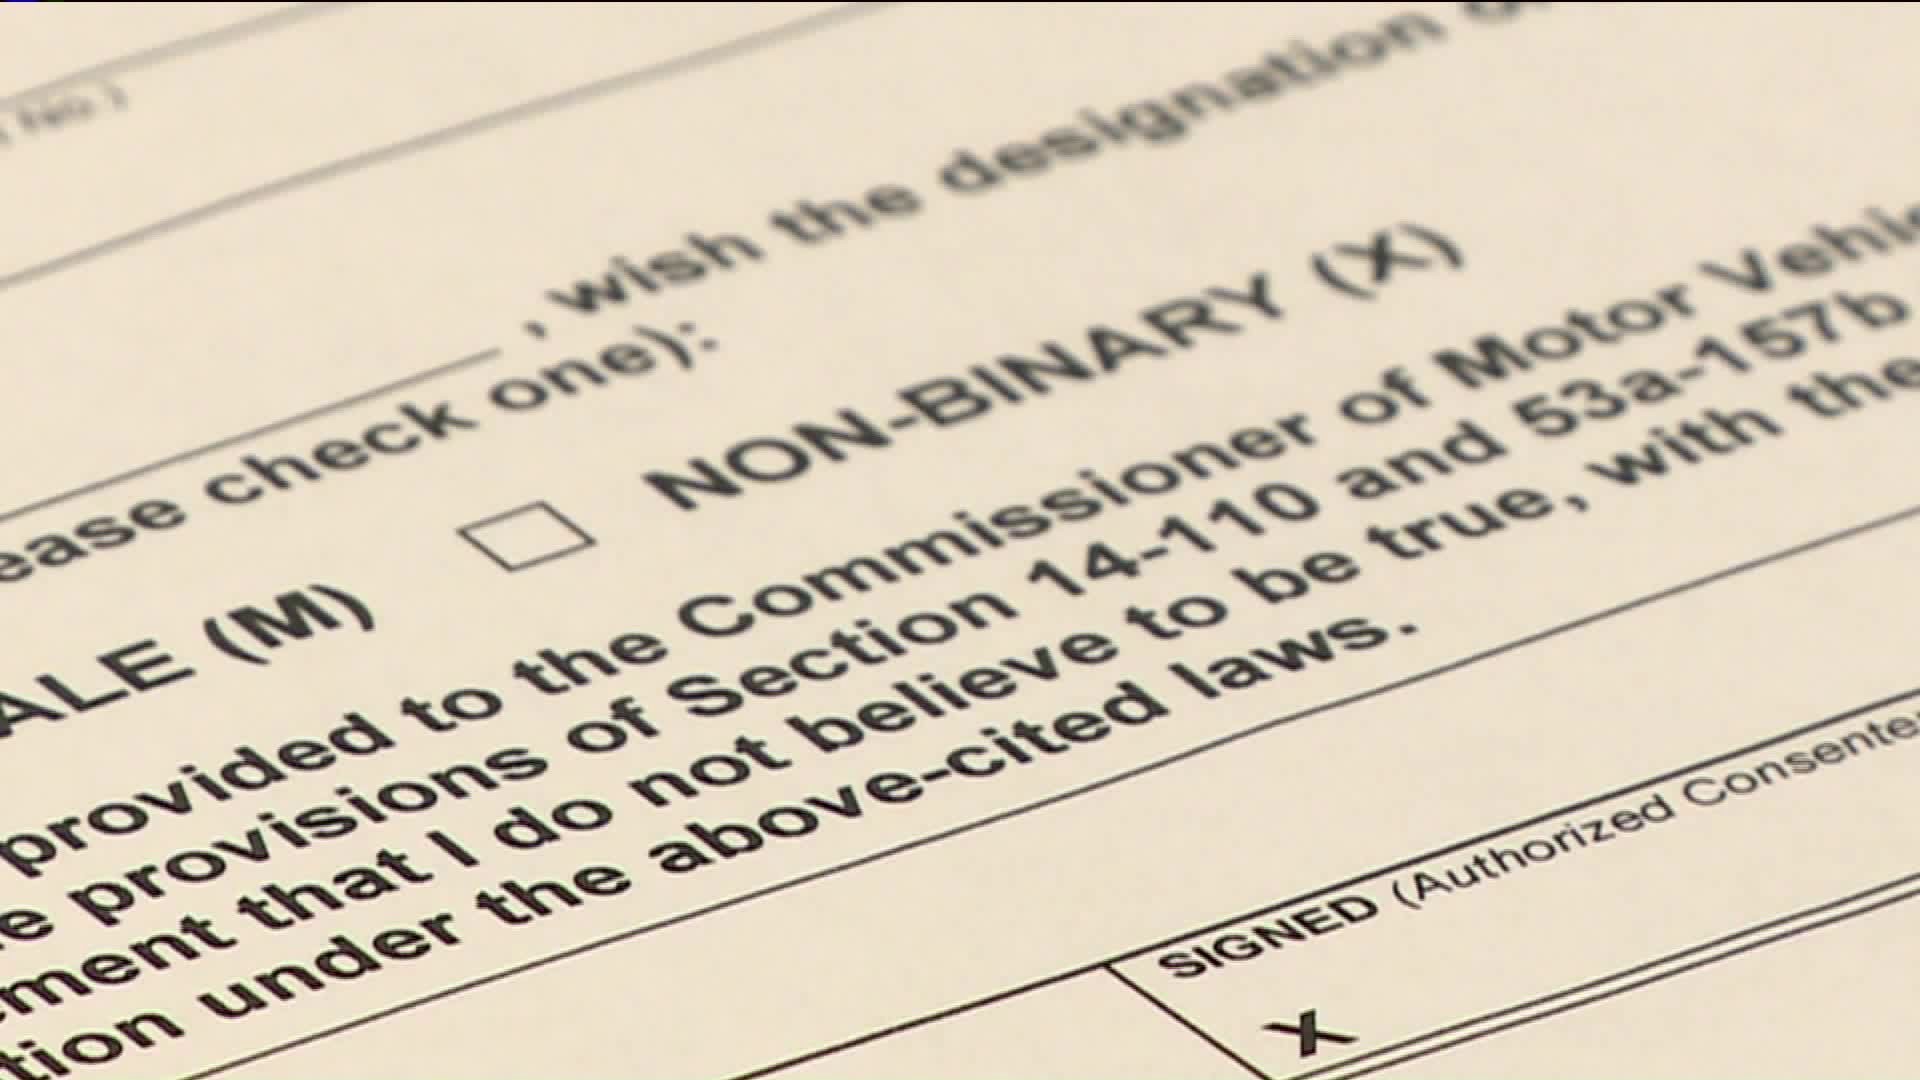 Connecticut DMV now offering non-binary option for gender on license